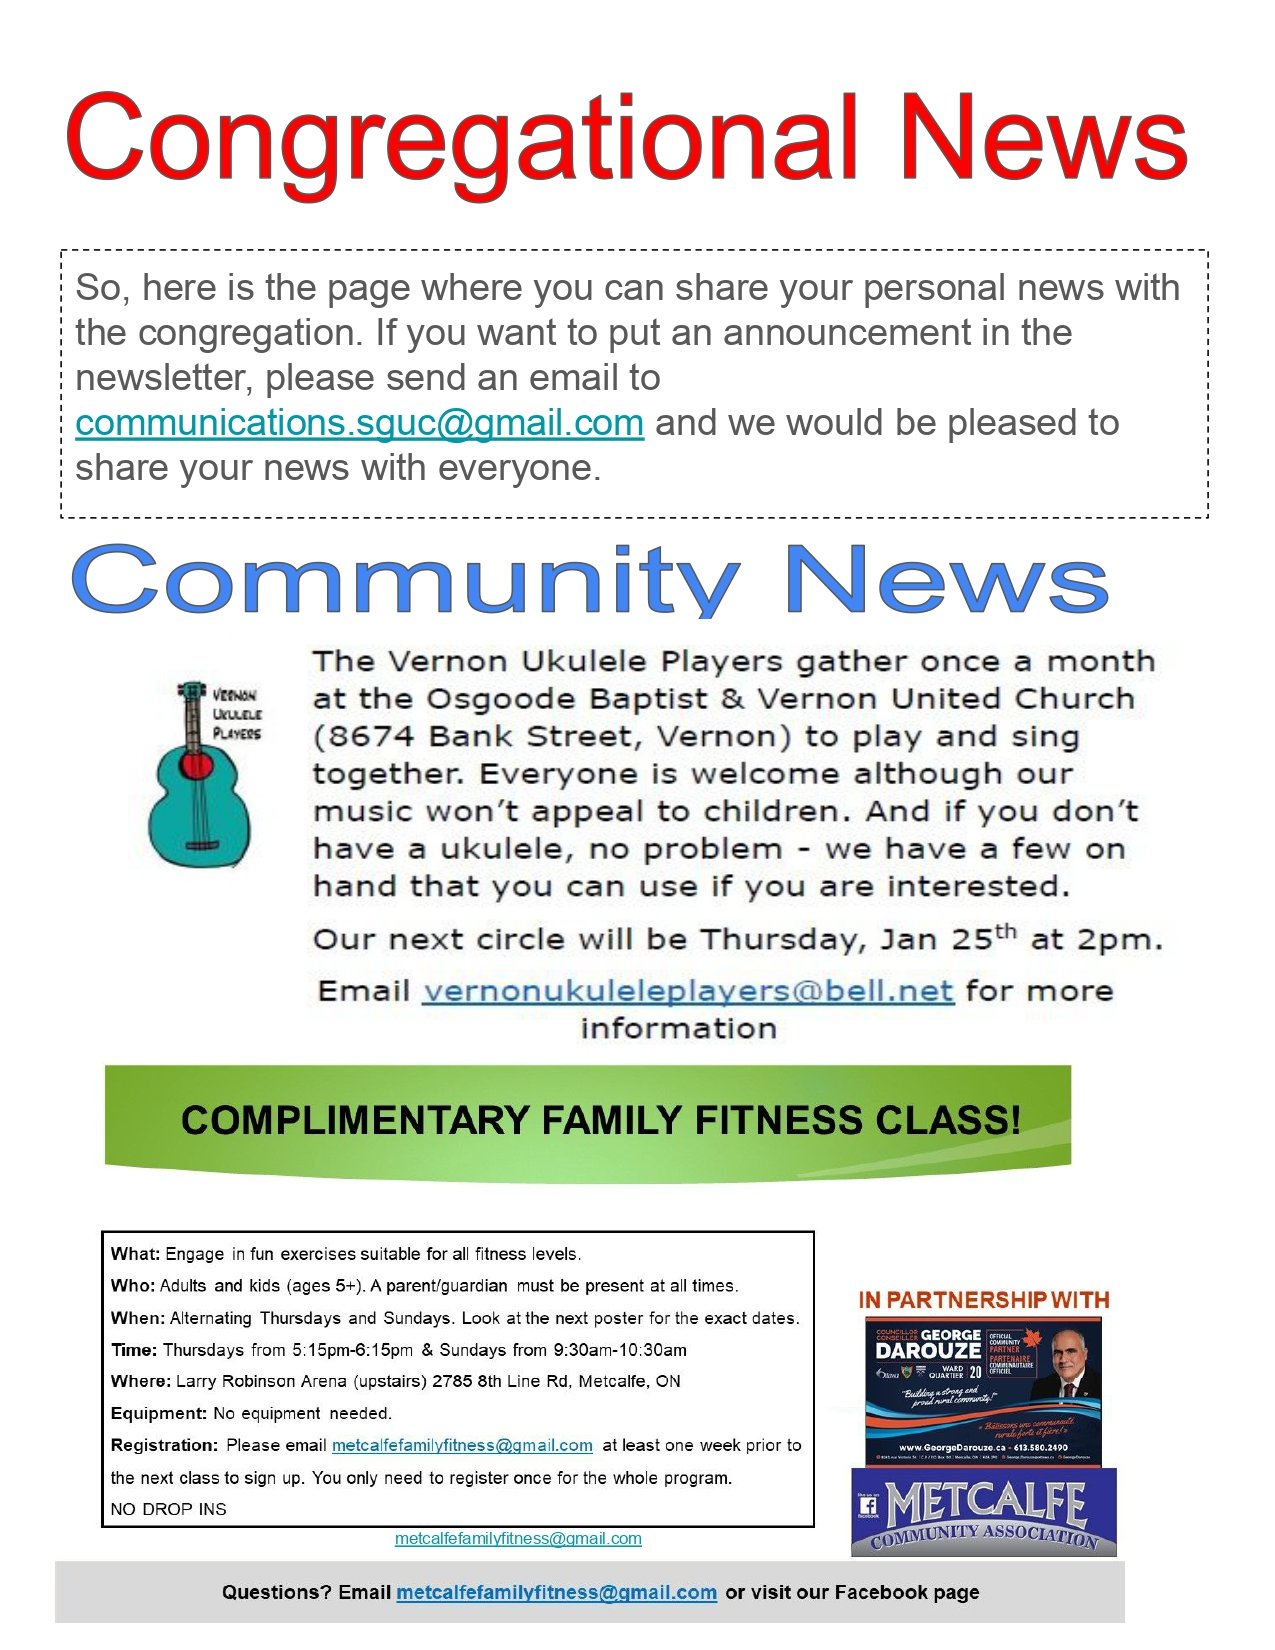 65ad62a88e00c7003abcbe25_Jan. 21_24 Newsletter (1).pdf_page-0005.jpg